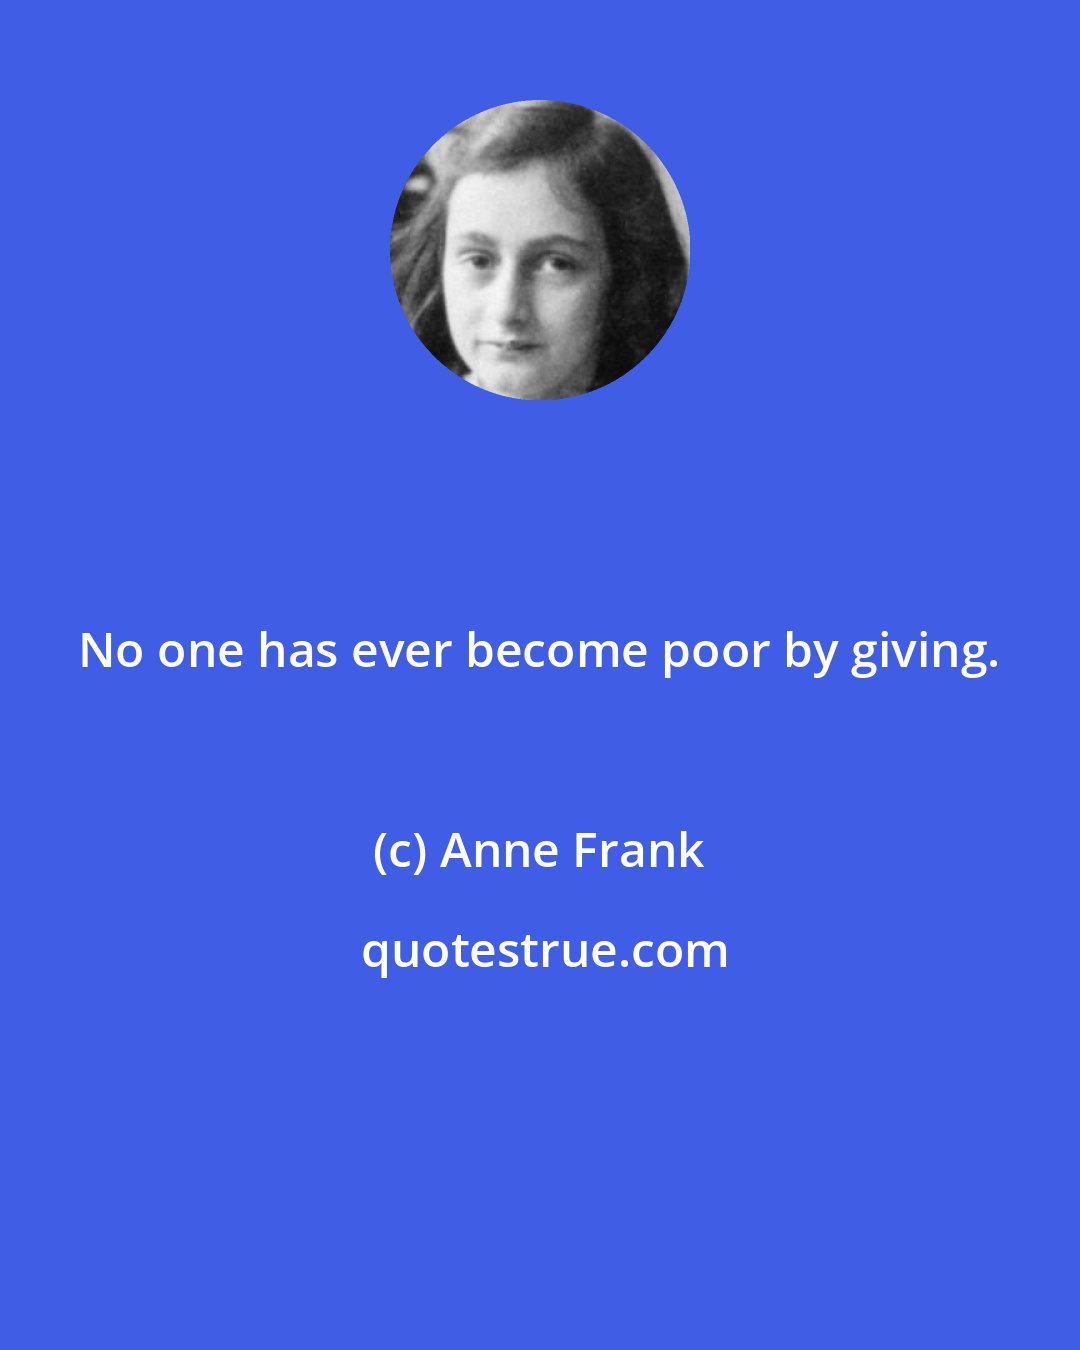 Anne Frank: No one has ever become poor by giving.